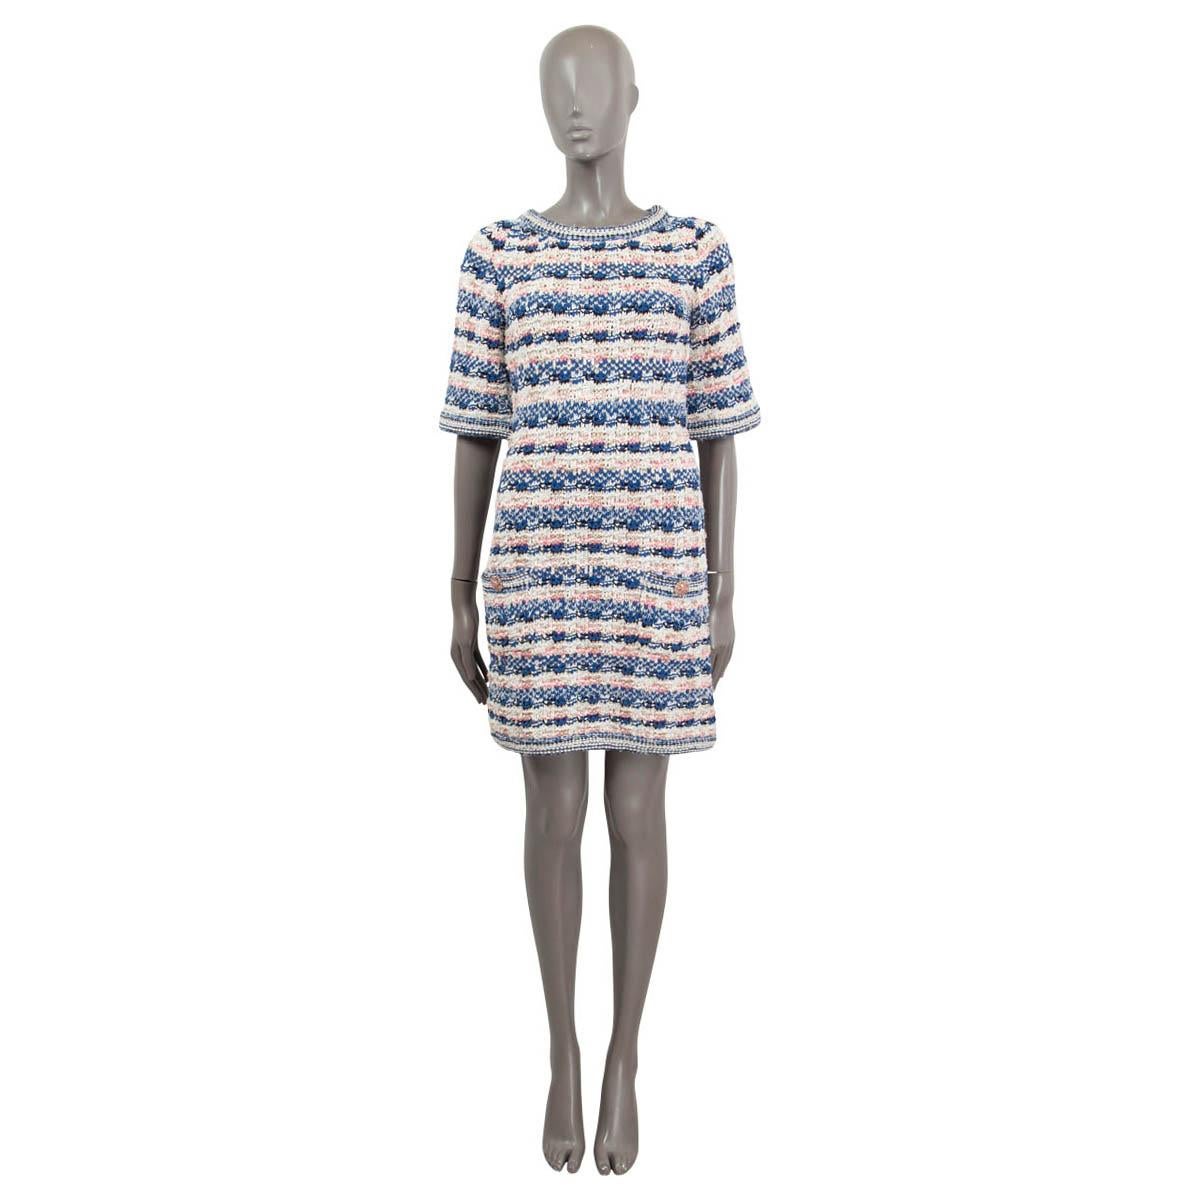 100% authentic Chanel short sleeve lurex knit dress in blue, pink and ivory viscose (42%), cotton (27%), polyester (21%), wool (5%) and polyamide (5%) with two Gripoix buttoned pockets on the front. Unlined. Has been worn and is in excellent